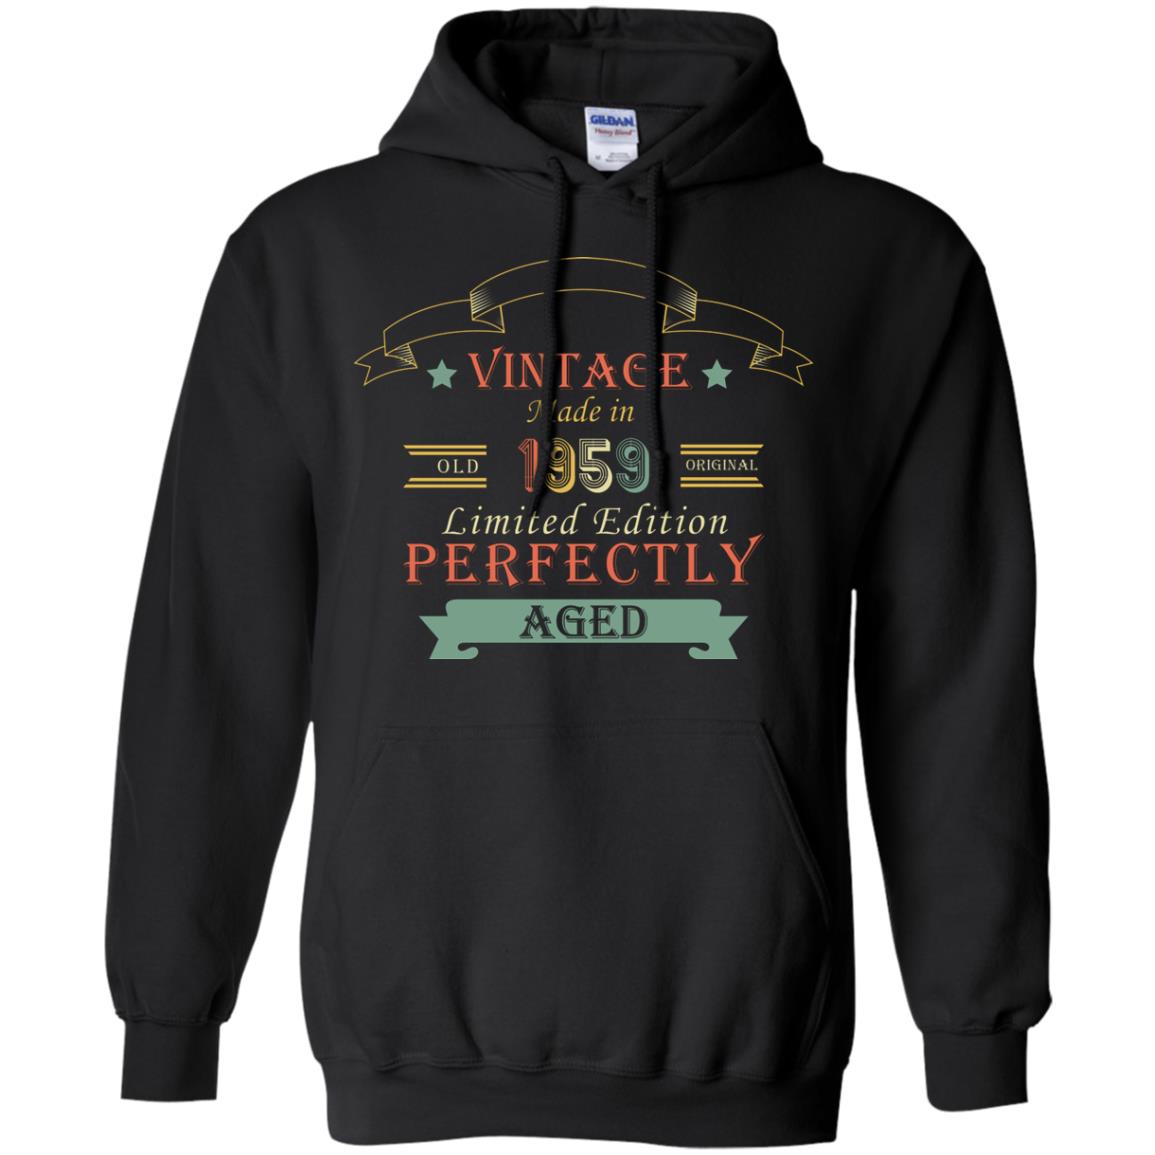 Vintage Made In Old 1959 Original Limited Edition Perfectly Aged 59th Birthday T-shirtG185 Gildan Pullover Hoodie 8 oz.